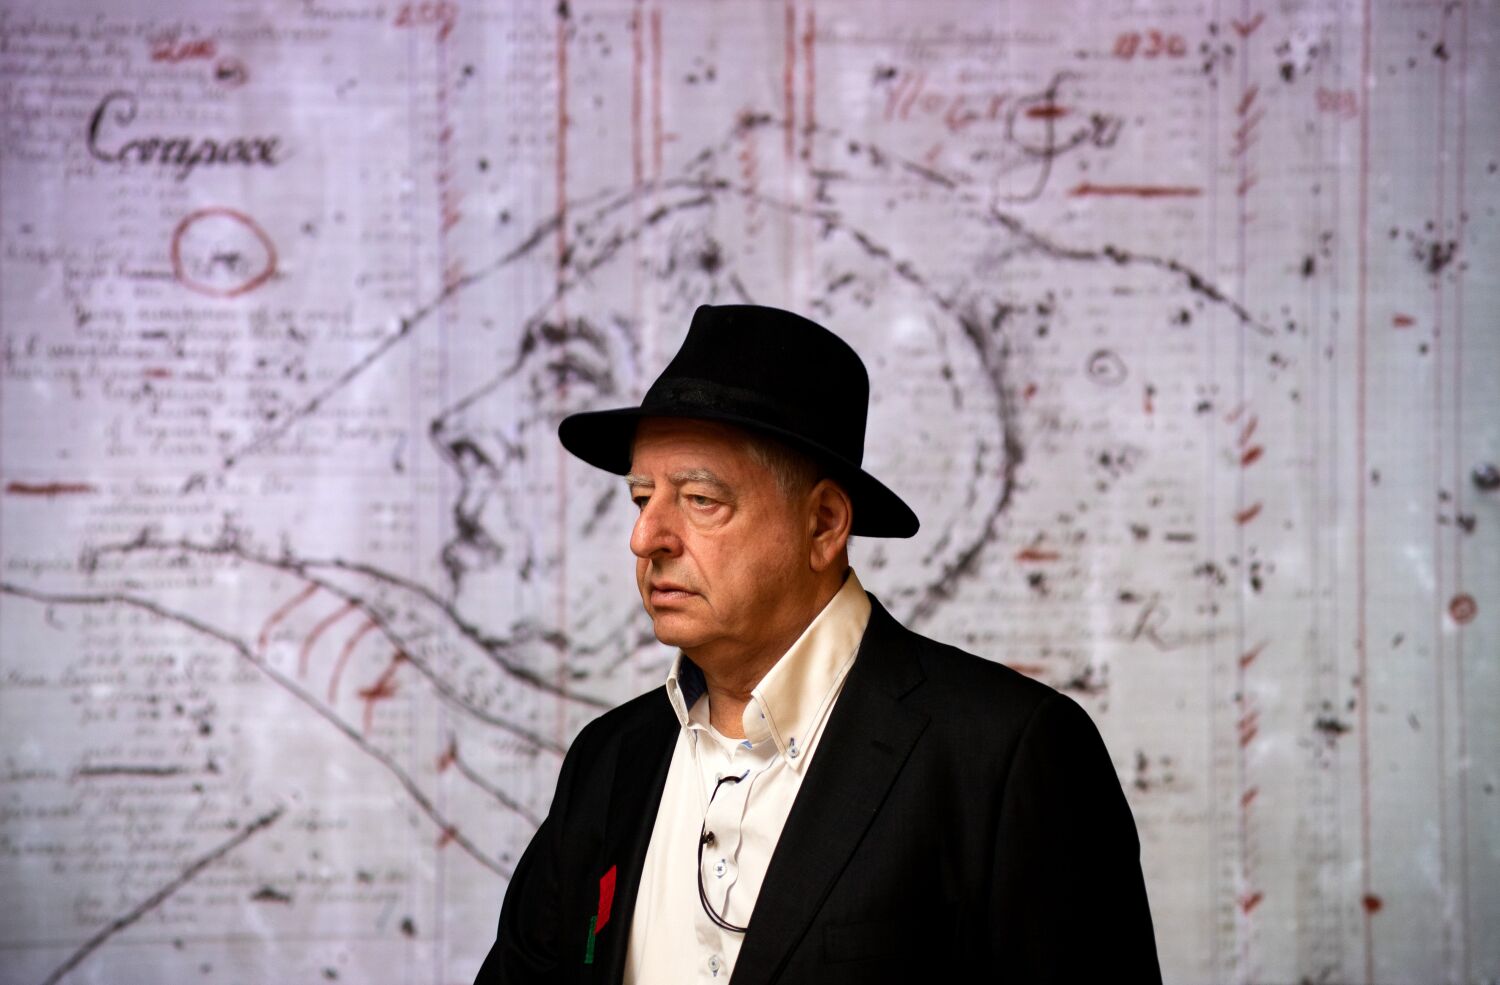 Why artist William Kentridge is embracing shadows in his new Broad show